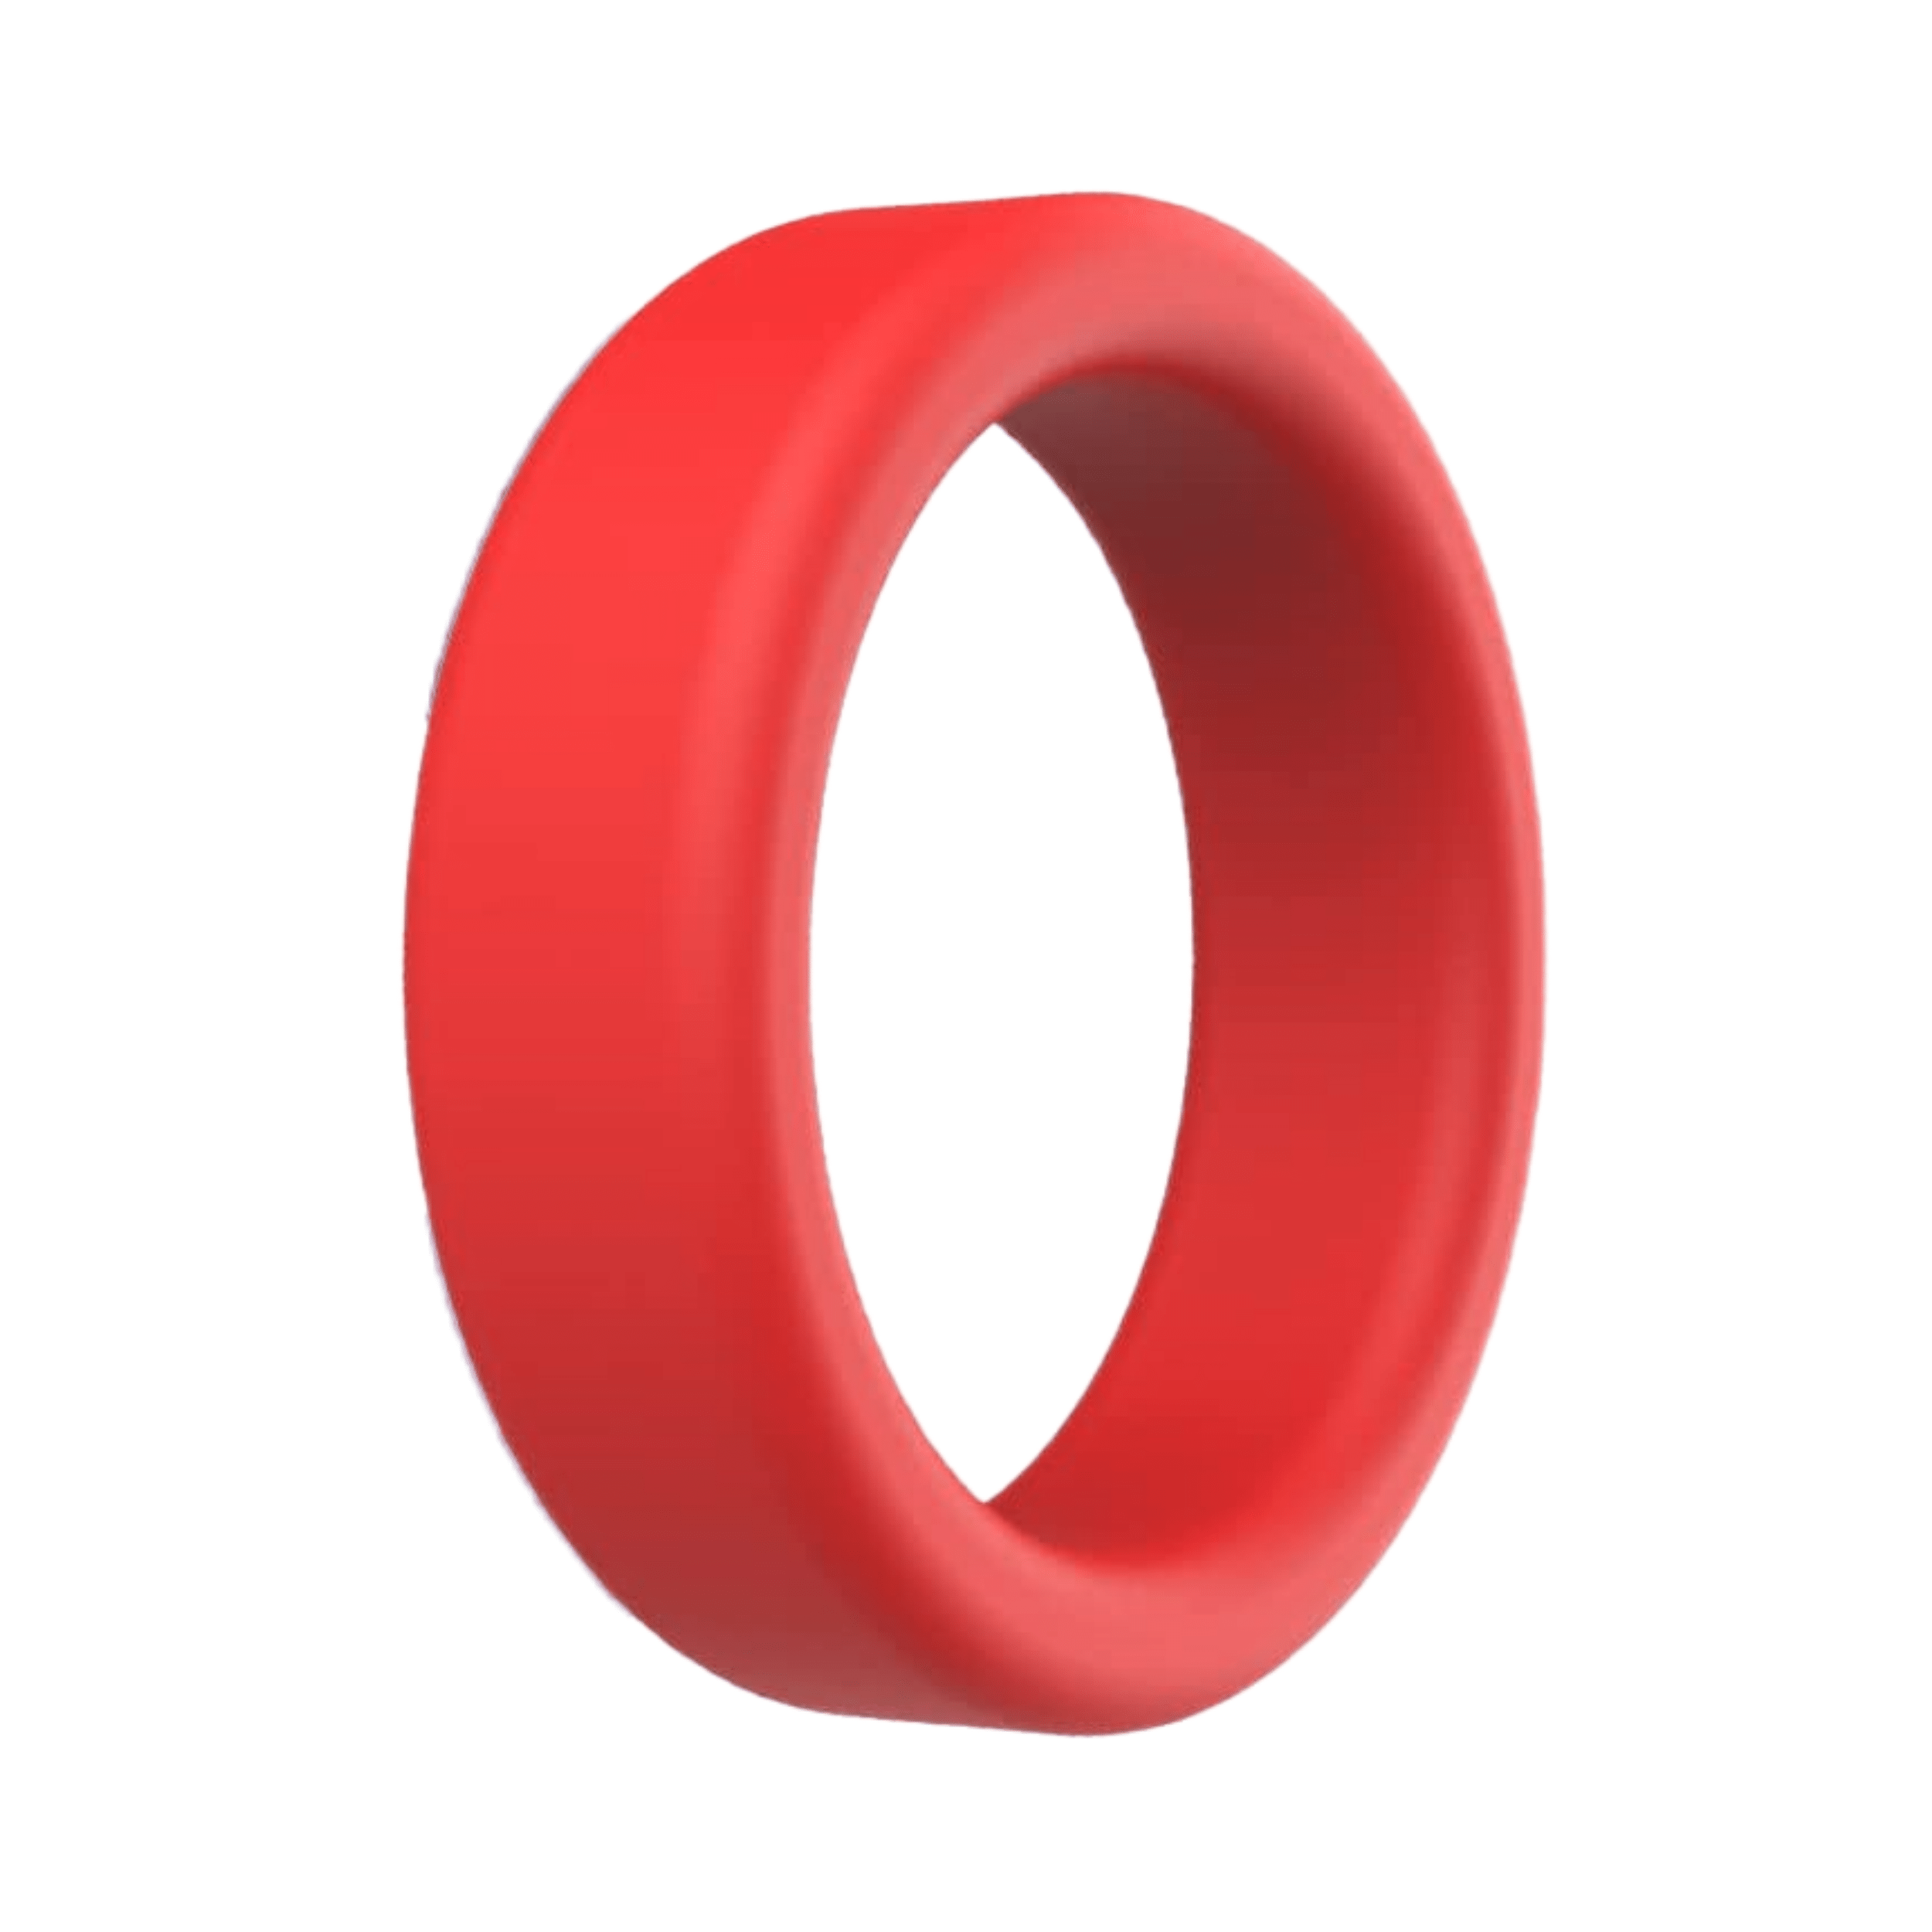 Stretchy Silicone Cock Ring Erection Red Cockring